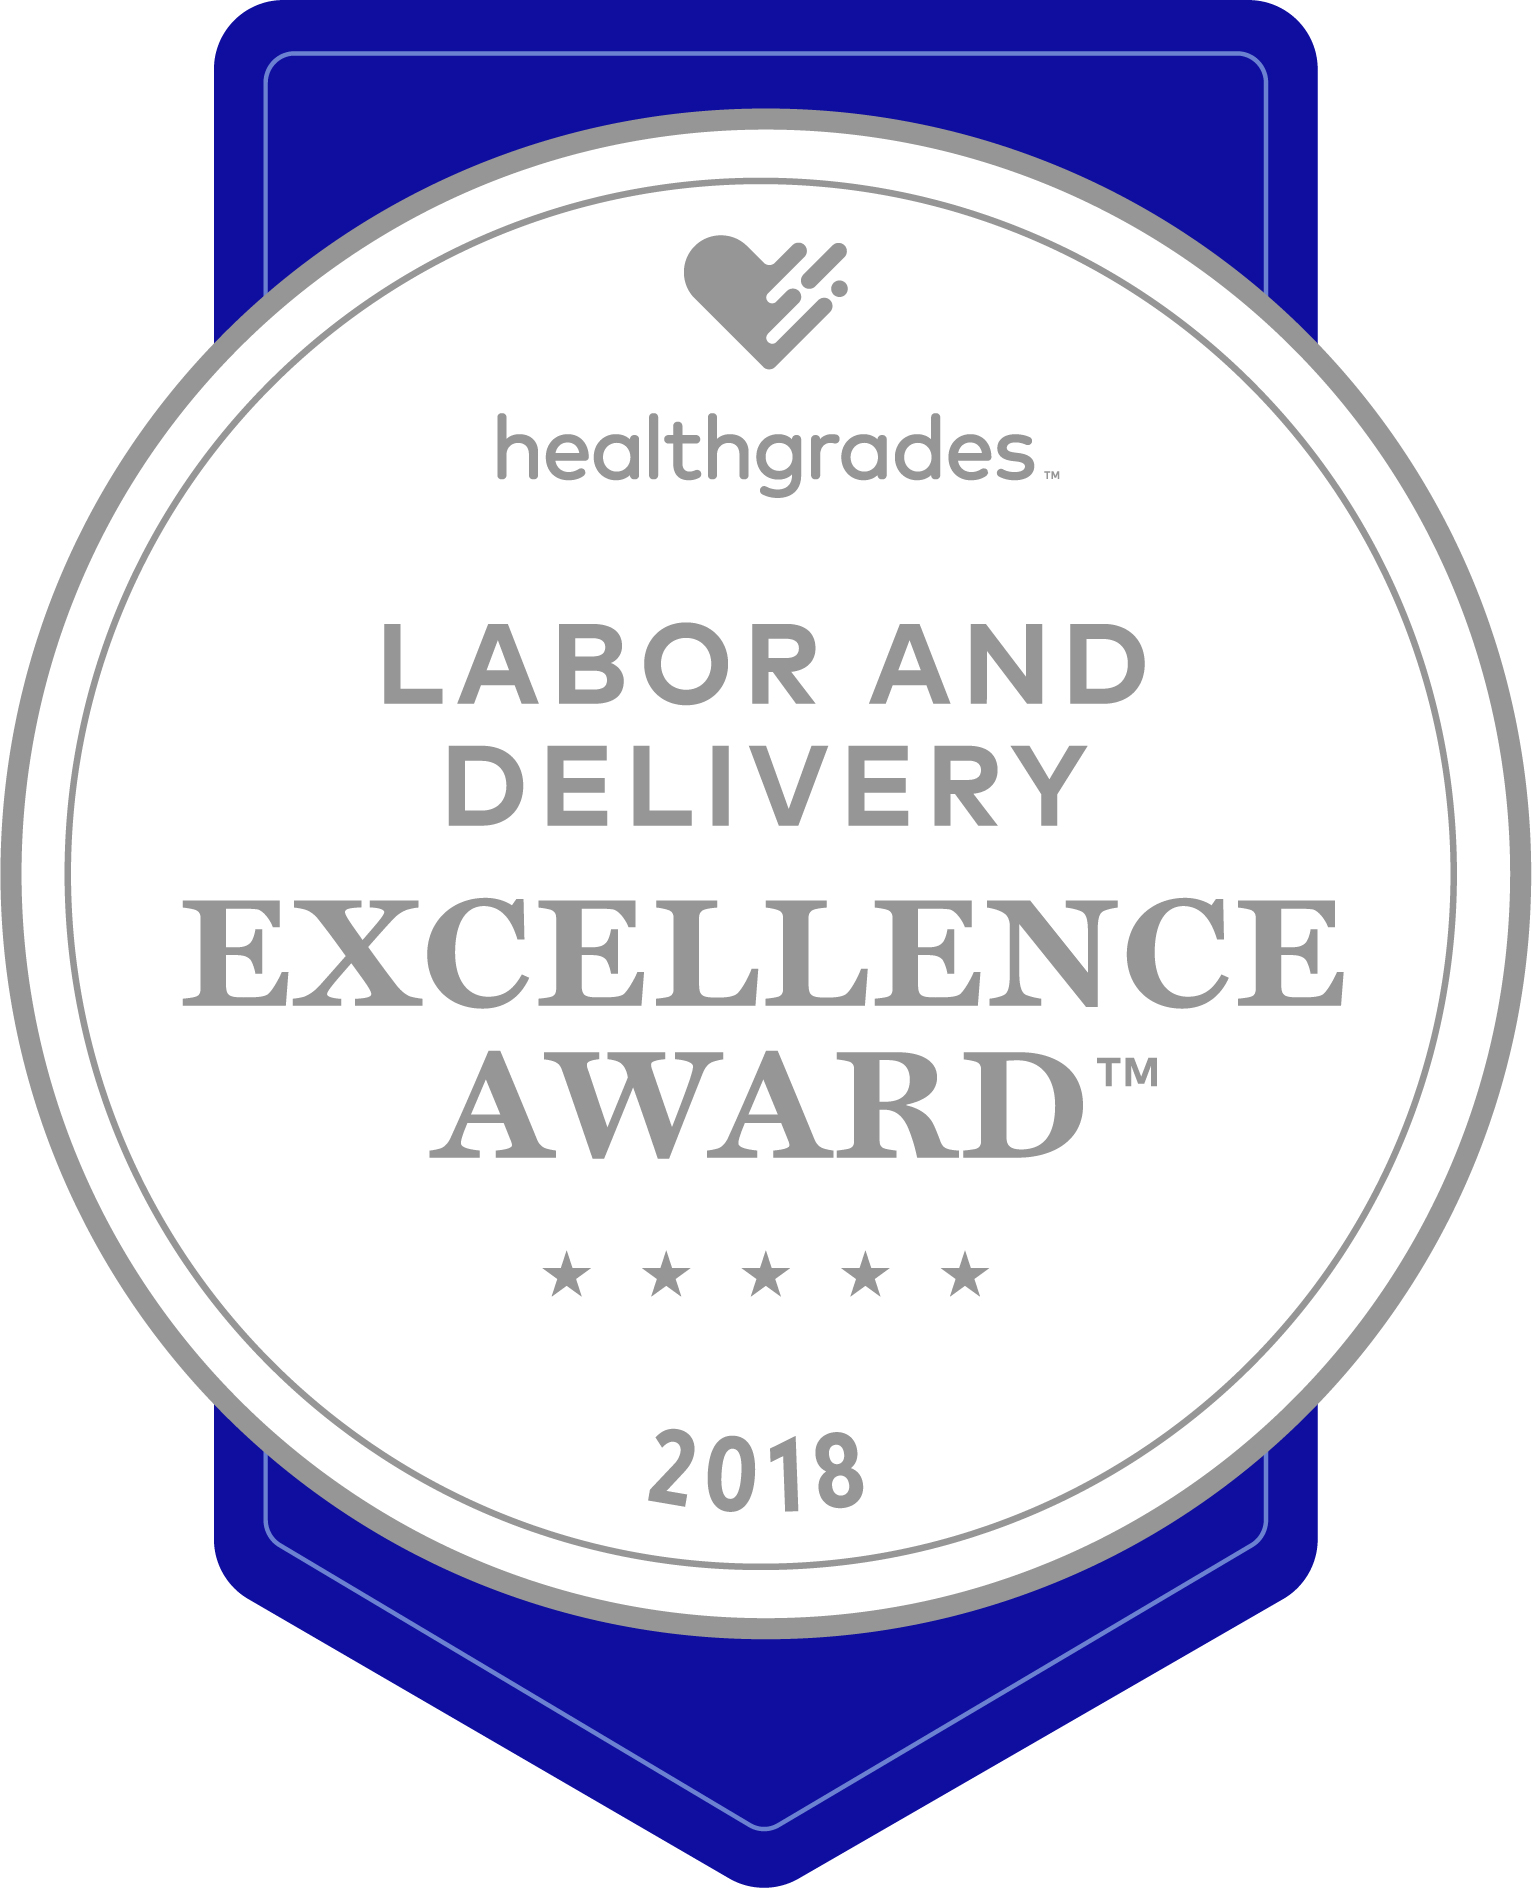 Healthgrades Labor and Delivery Excellence Award Medallion for 2018